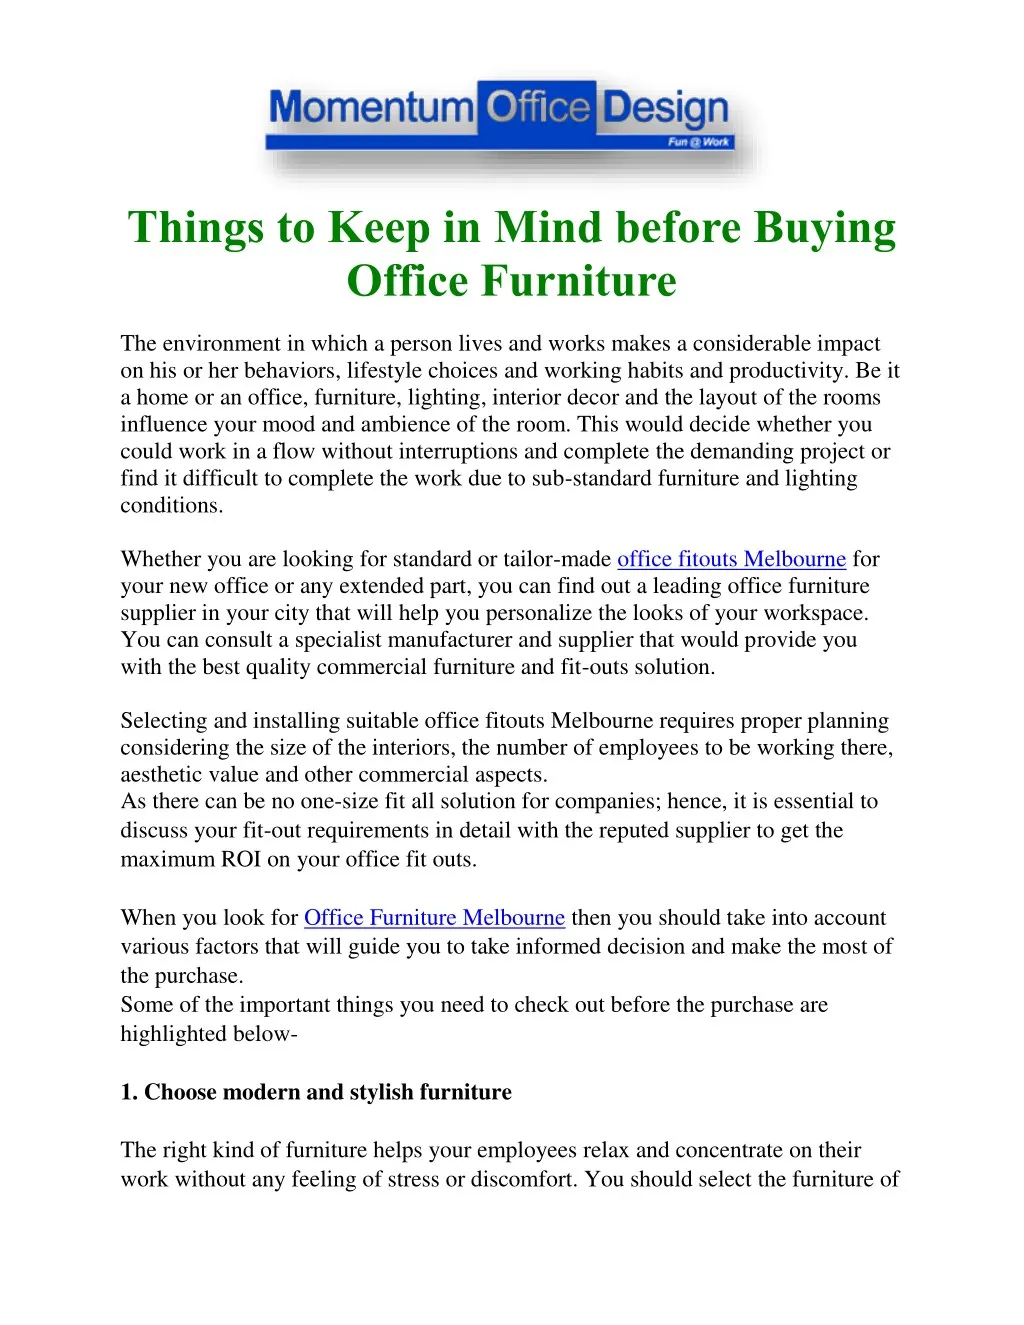 things to keep in mind before buying office